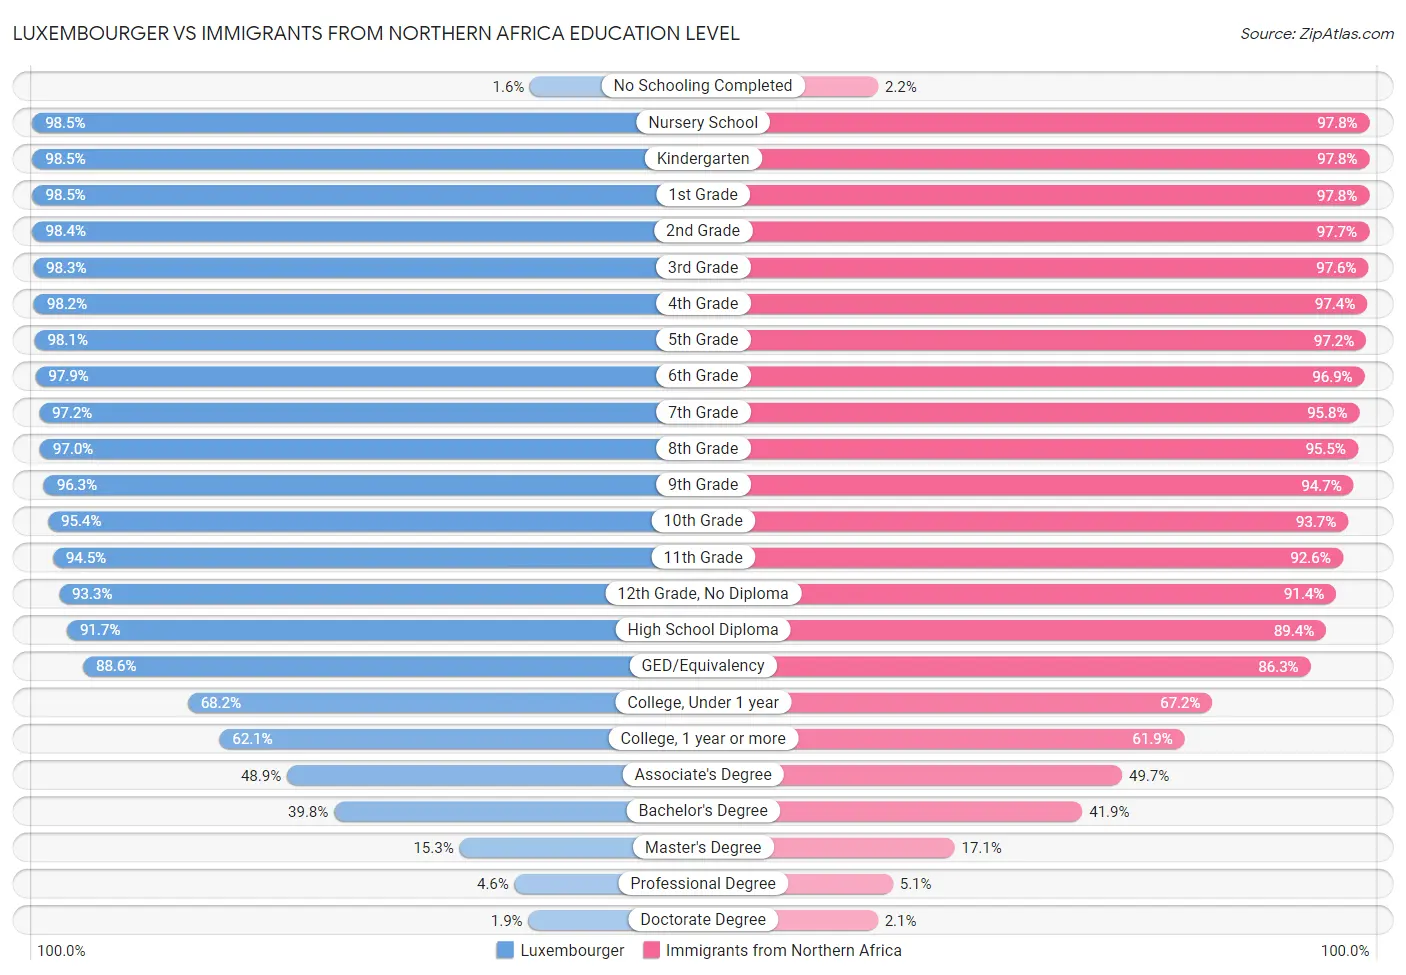 Luxembourger vs Immigrants from Northern Africa Education Level